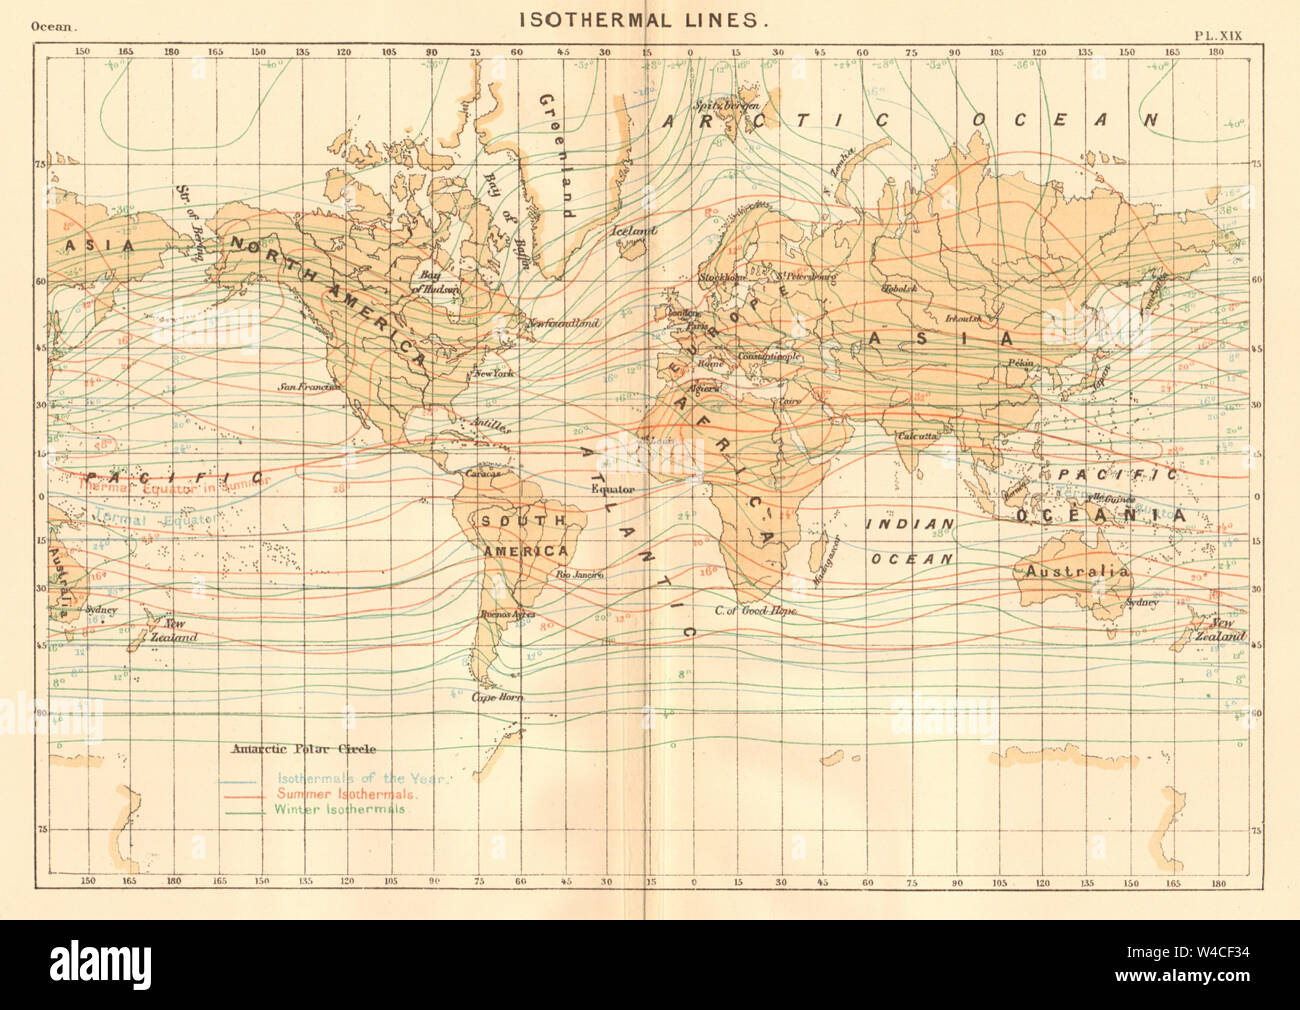 Isothermal Lines. World 1886 old antique vintage map plan chart Stock Photo